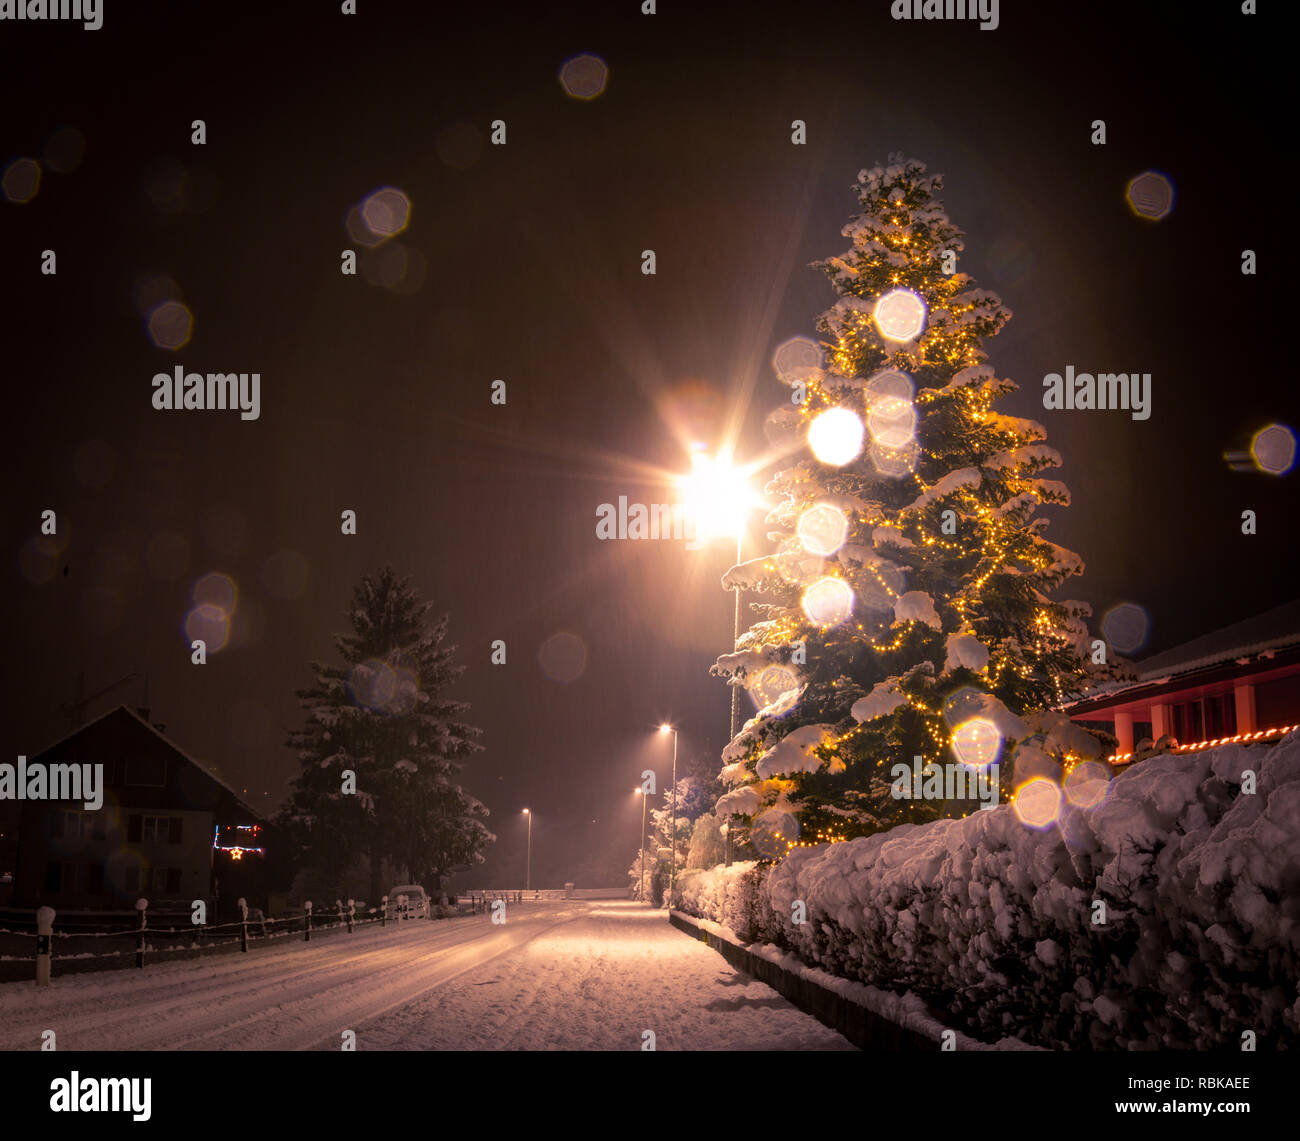 shiny christmas lighing on big tree in rural scene with snow fall and lens flare Stock Photo